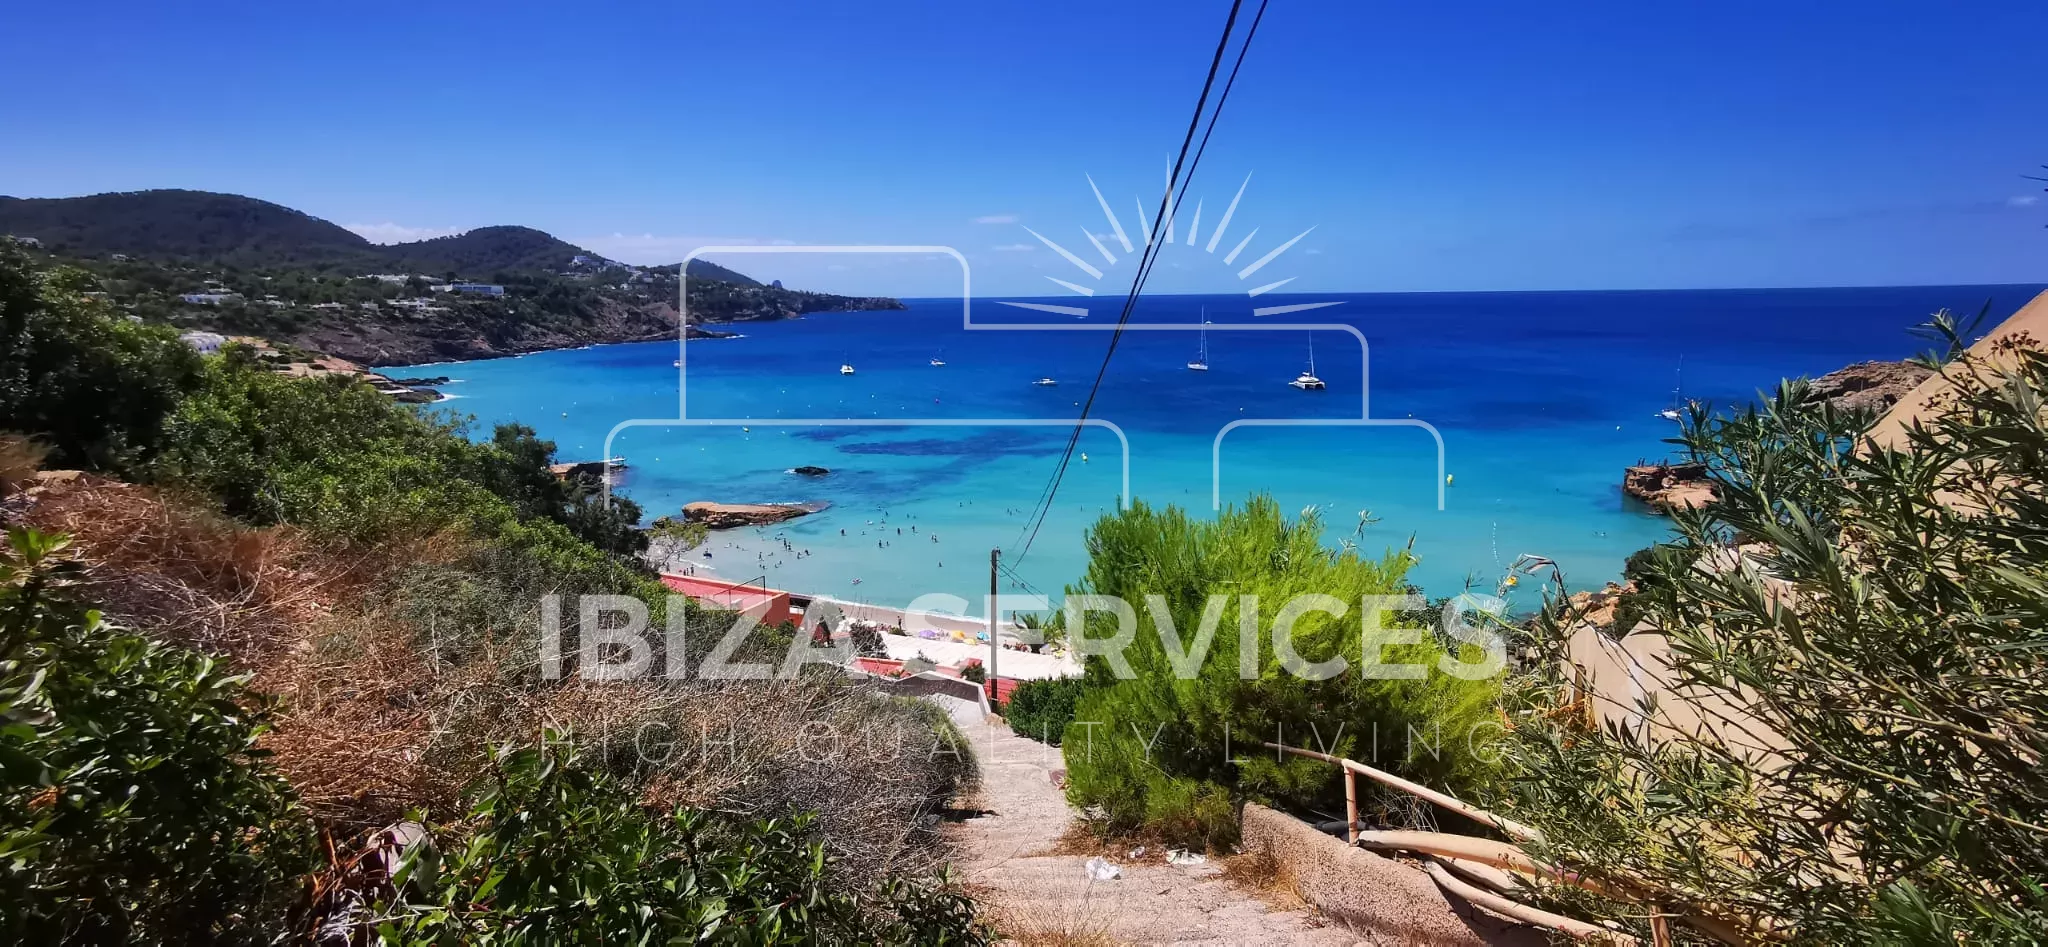 Cala tarida, plot for sale with project and direct access to the beach